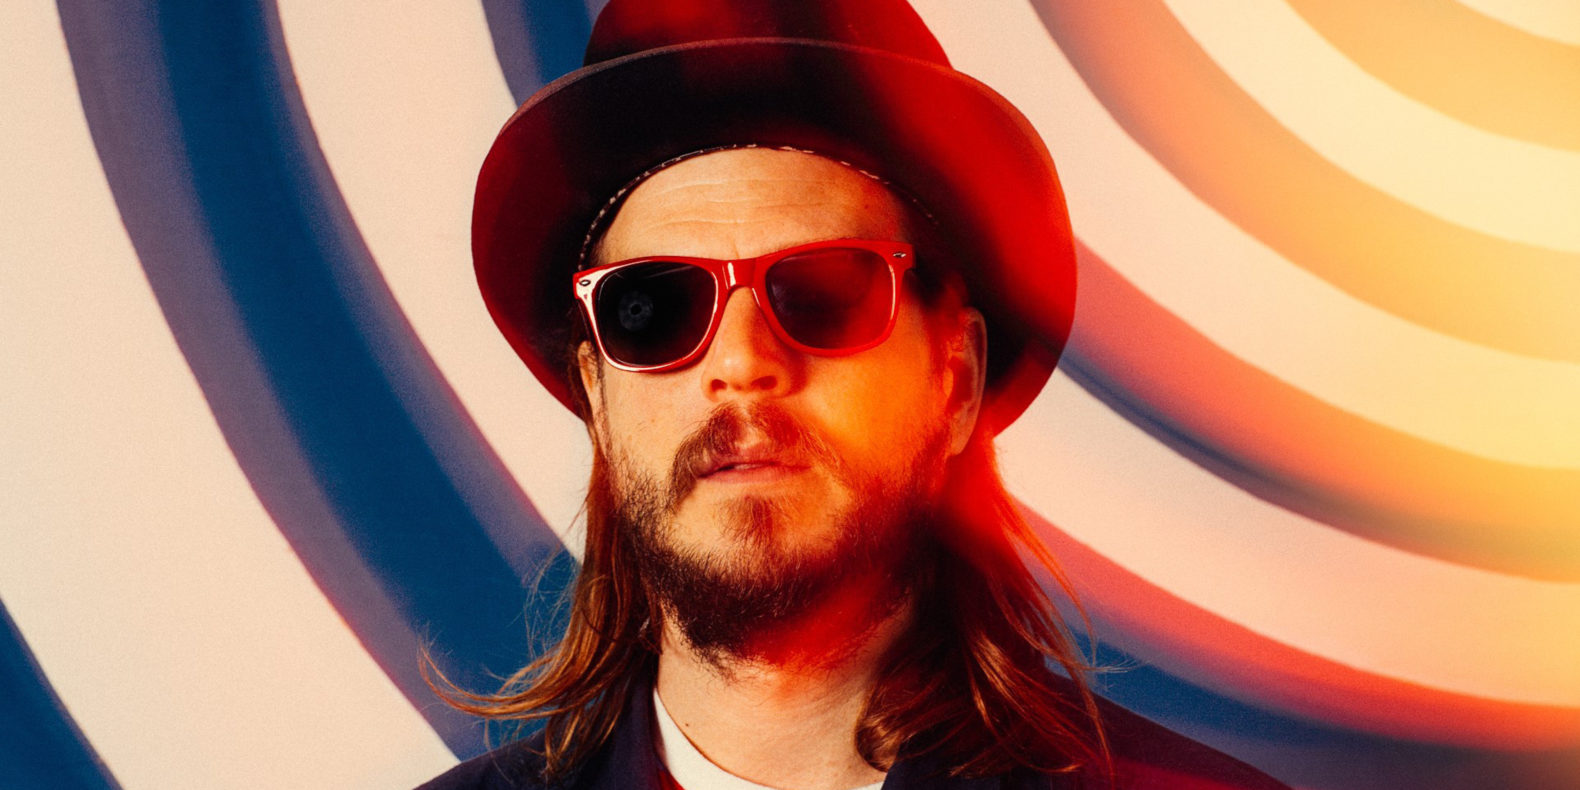 Piano player Marco Benevento in a top hat and sunglasses in front of a wall with curved blue and white stripes